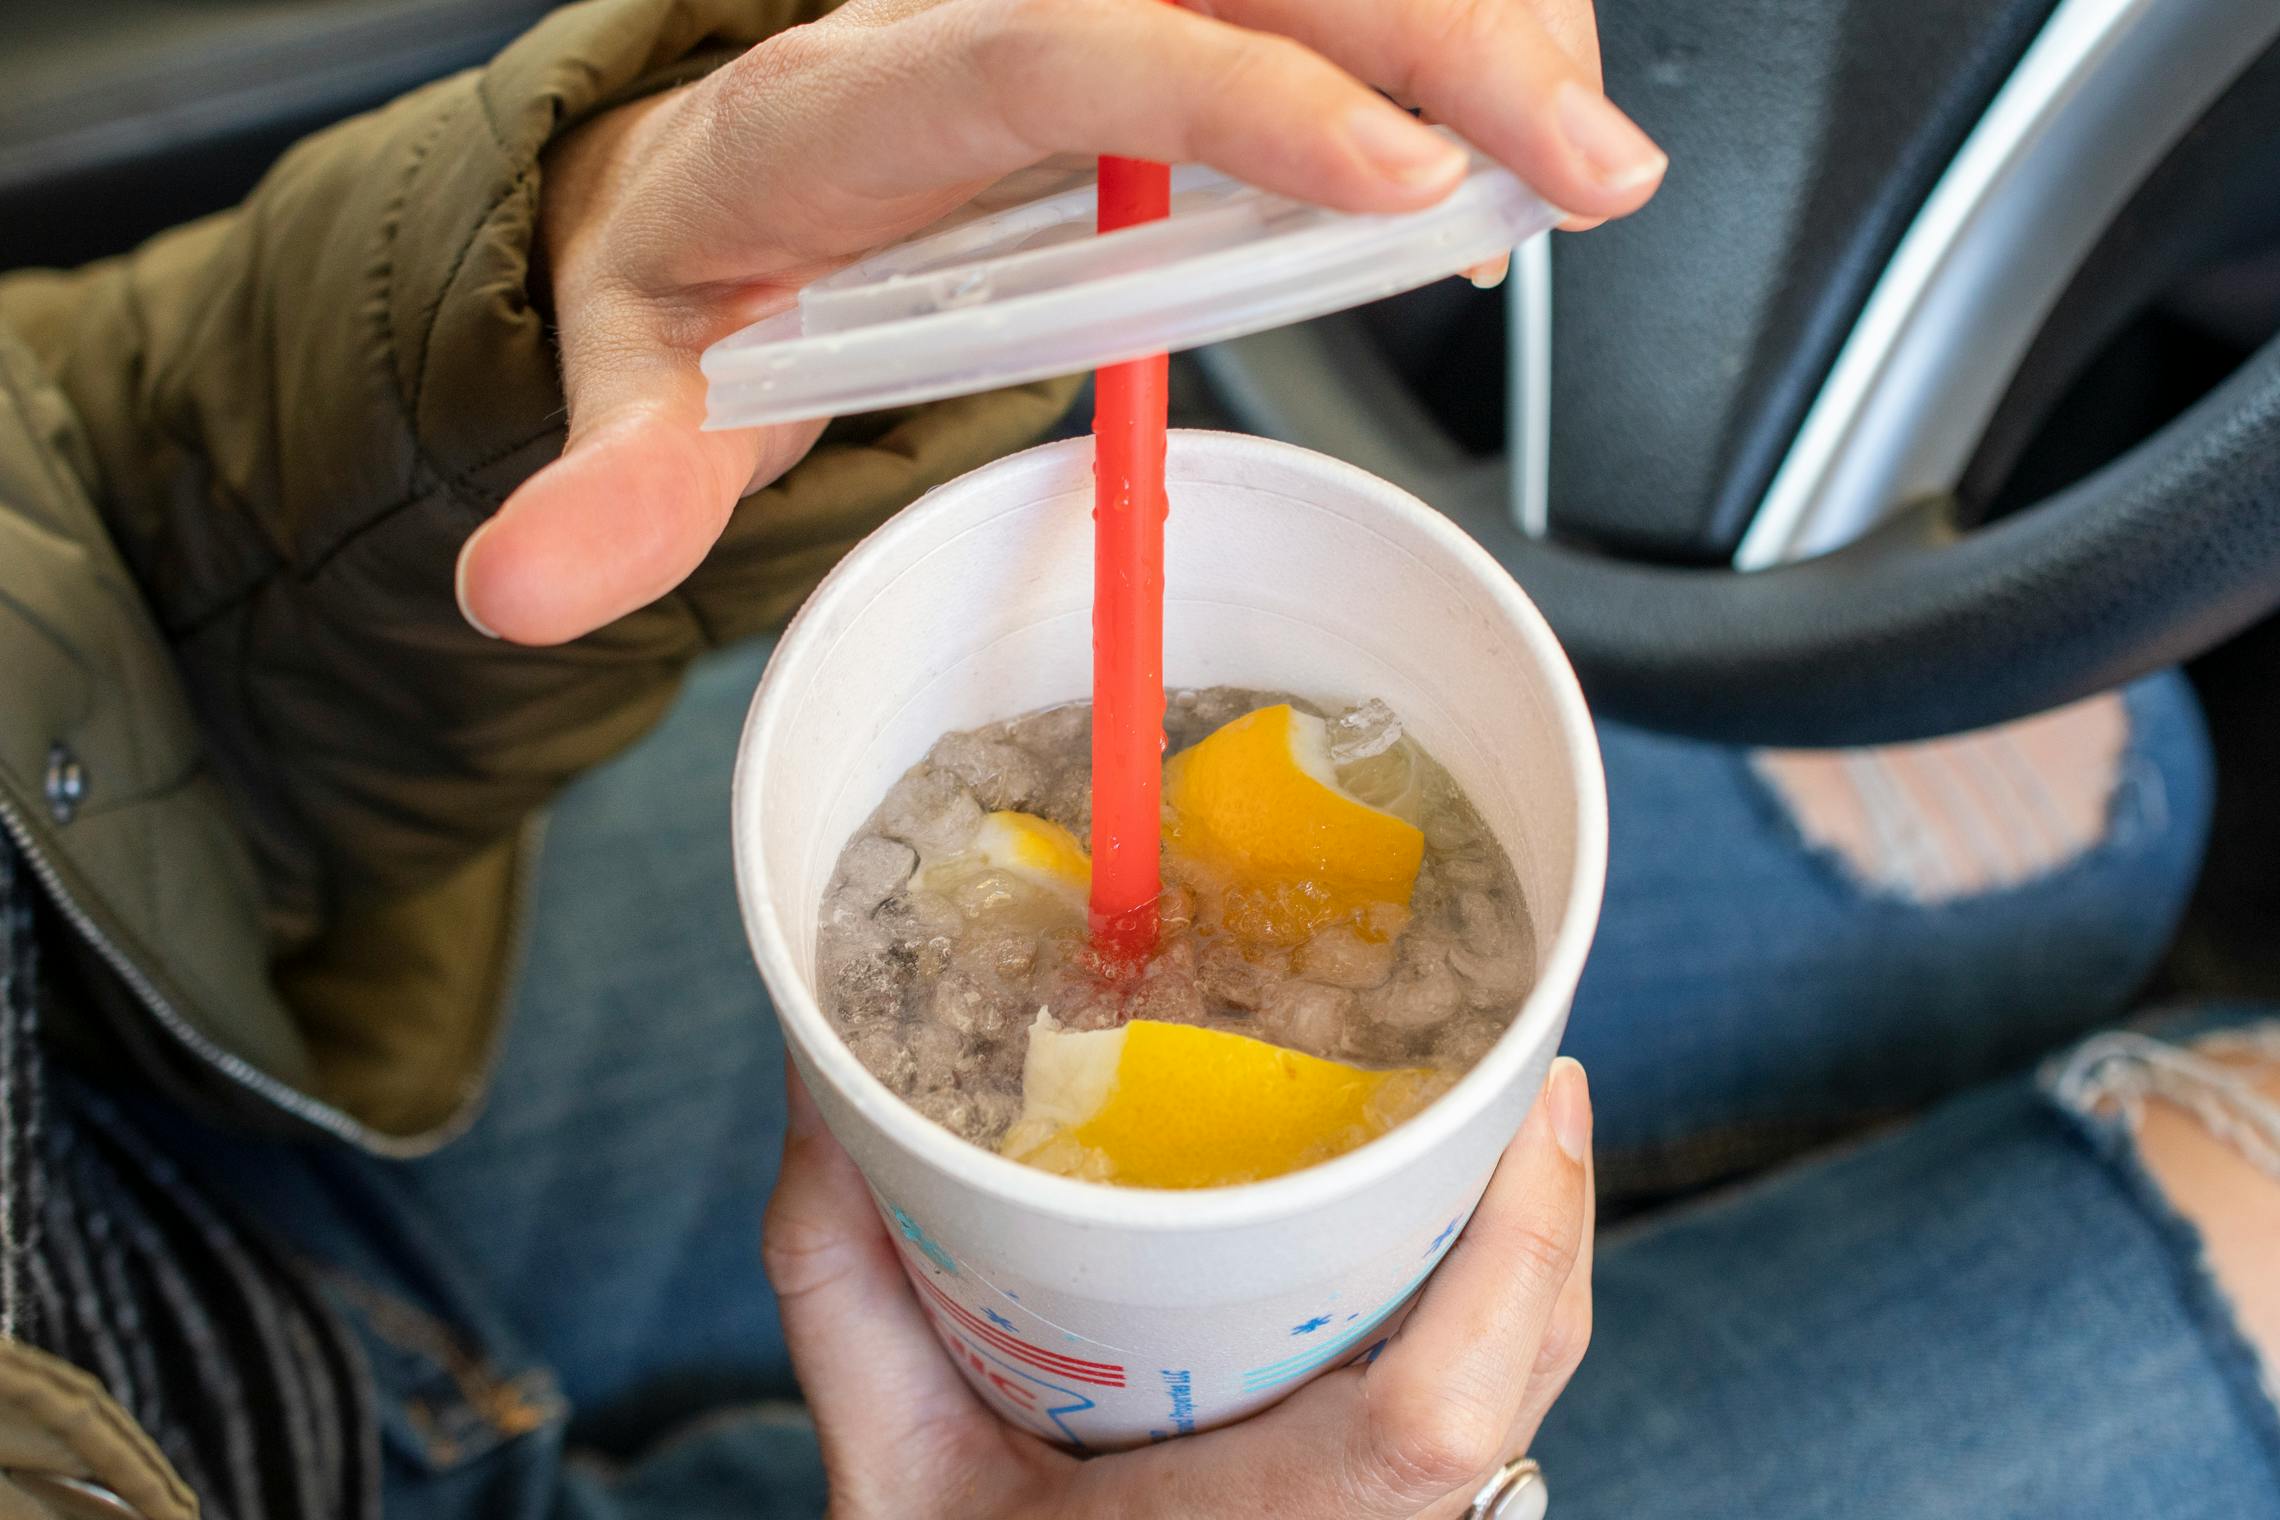 A person taking the lid off of a Sonic drink cup, showing the inside with ice, lemon, and their purple drink.